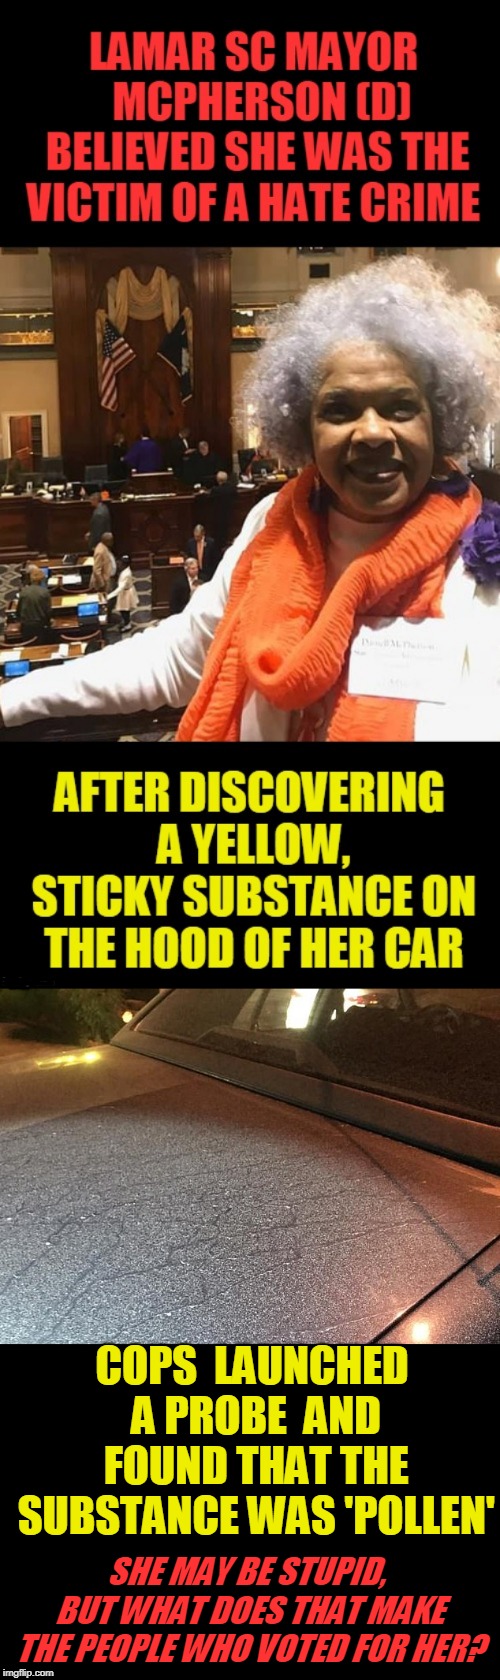 This is a True story , not made up.TREES ARE RACIST | COPS  LAUNCHED A PROBE  AND FOUND THAT THE SUBSTANCE WAS 'POLLEN'; SHE MAY BE STUPID, BUT WHAT DOES THAT MAKE THE PEOPLE WHO VOTED FOR HER? | image tagged in stupid people,hate crime,cry wolf,pollen,racist trees | made w/ Imgflip meme maker